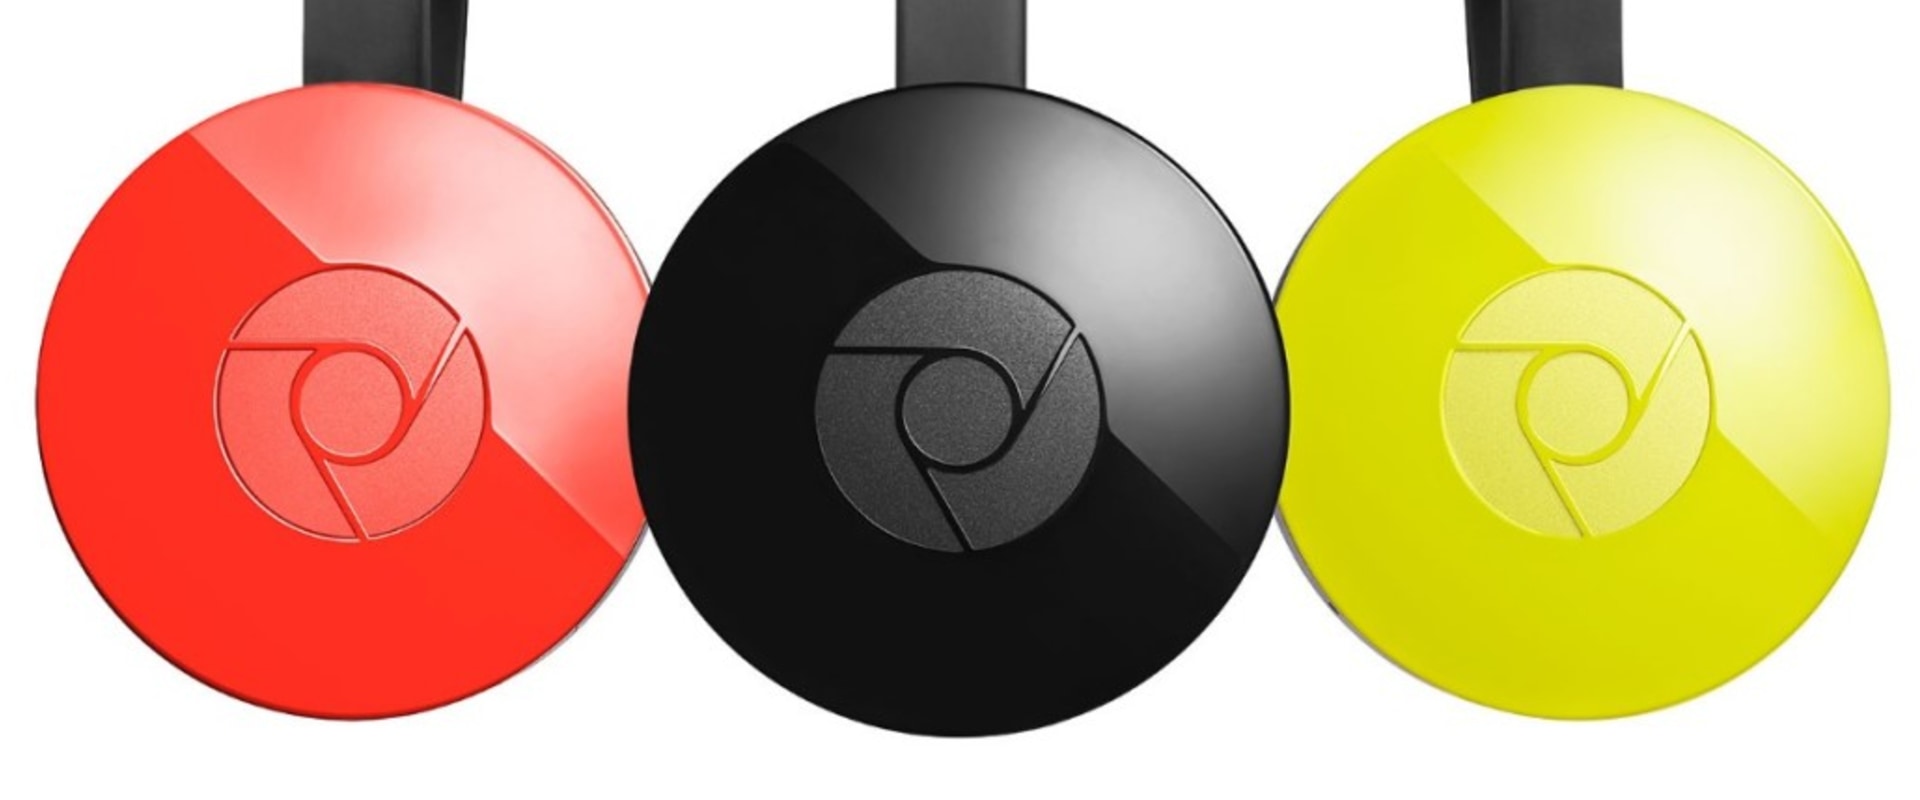 Chromecast: All You Need to Know About This Popular Streaming Device